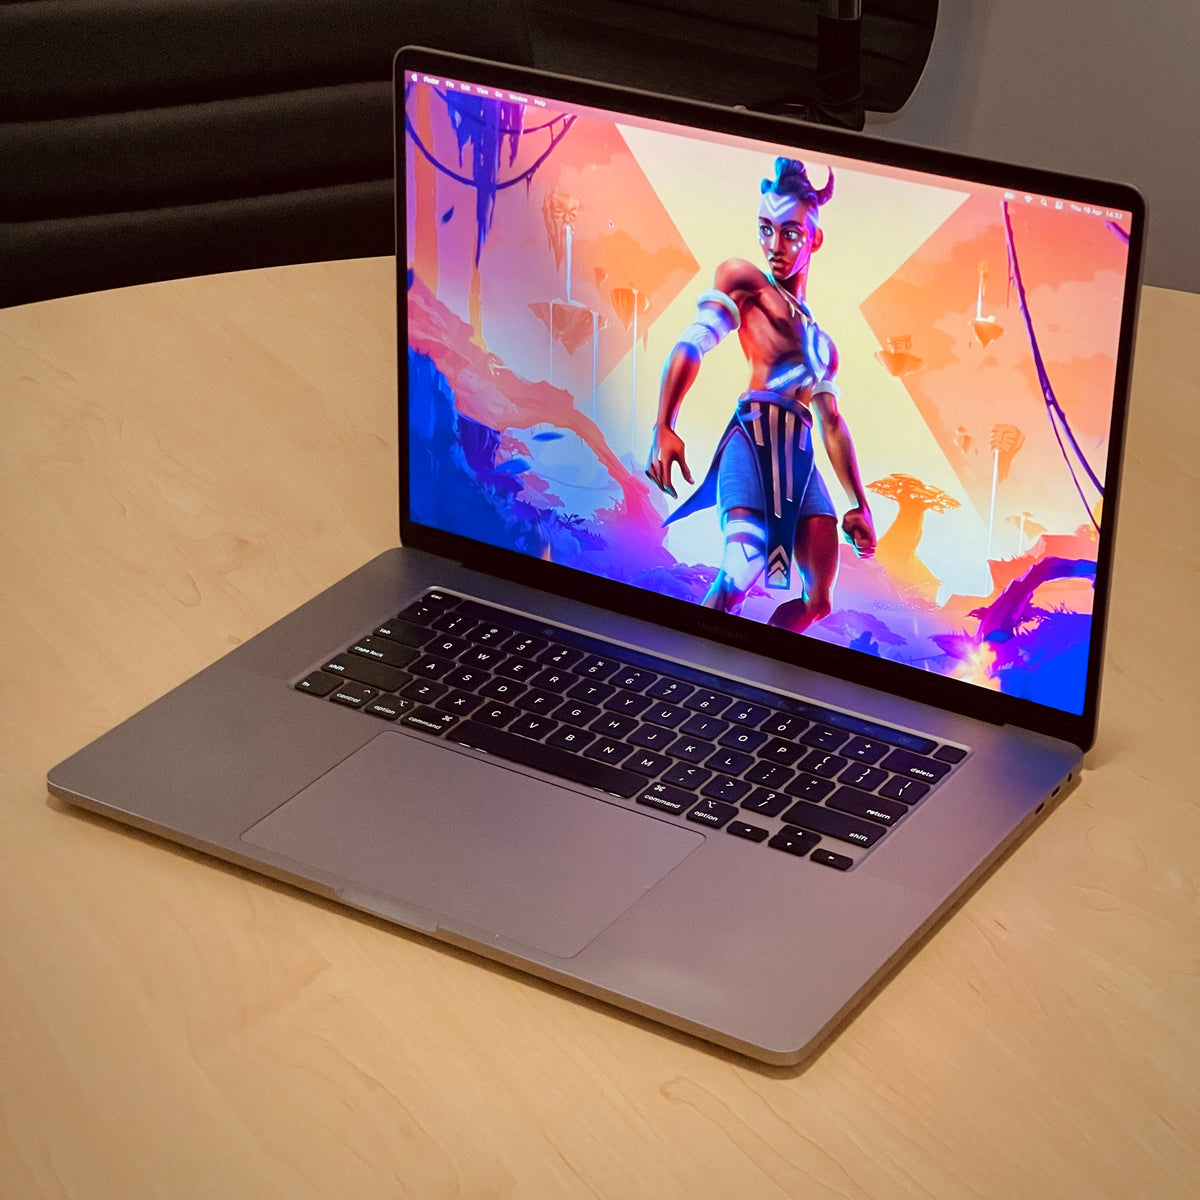 Custom Build 2019 Apple MacBook Pro 16-inch 2.4GHz 8-Core i9 (Touch Bar, 64GB RAM, 512GB SSD, Space Gray) - Pre Owned / 3 Month Warranty - Mac Shack